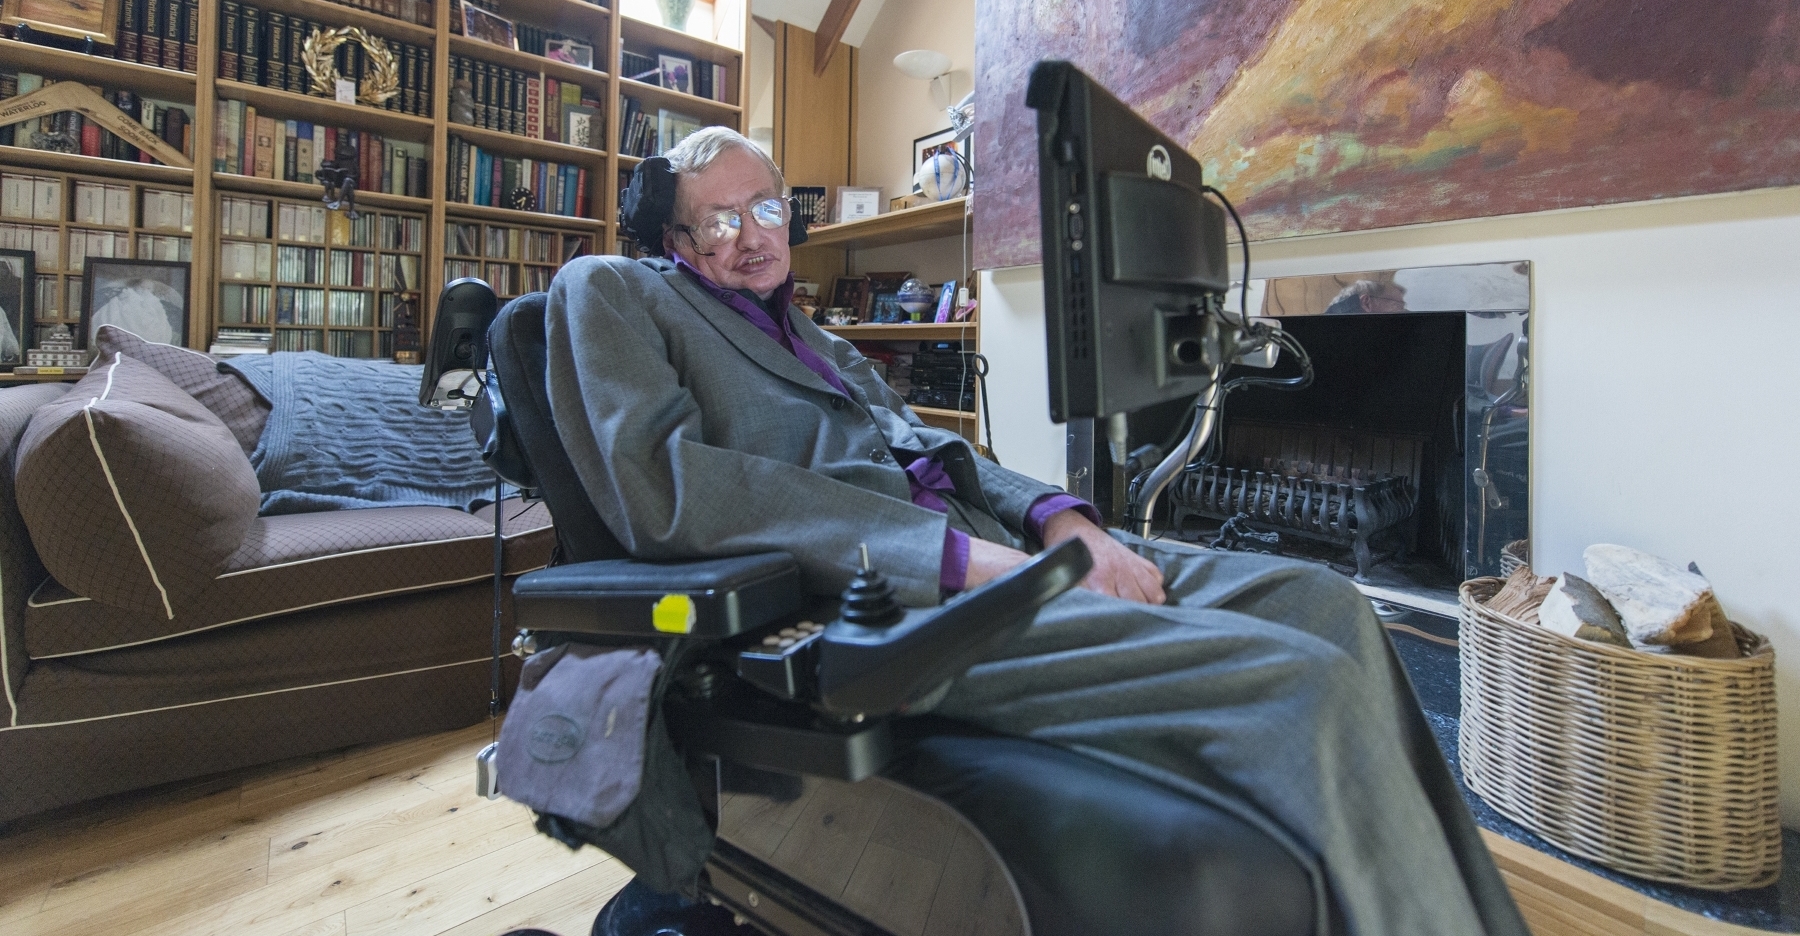 Stephen Hawking in his home library (Credit: PCWorld.com)